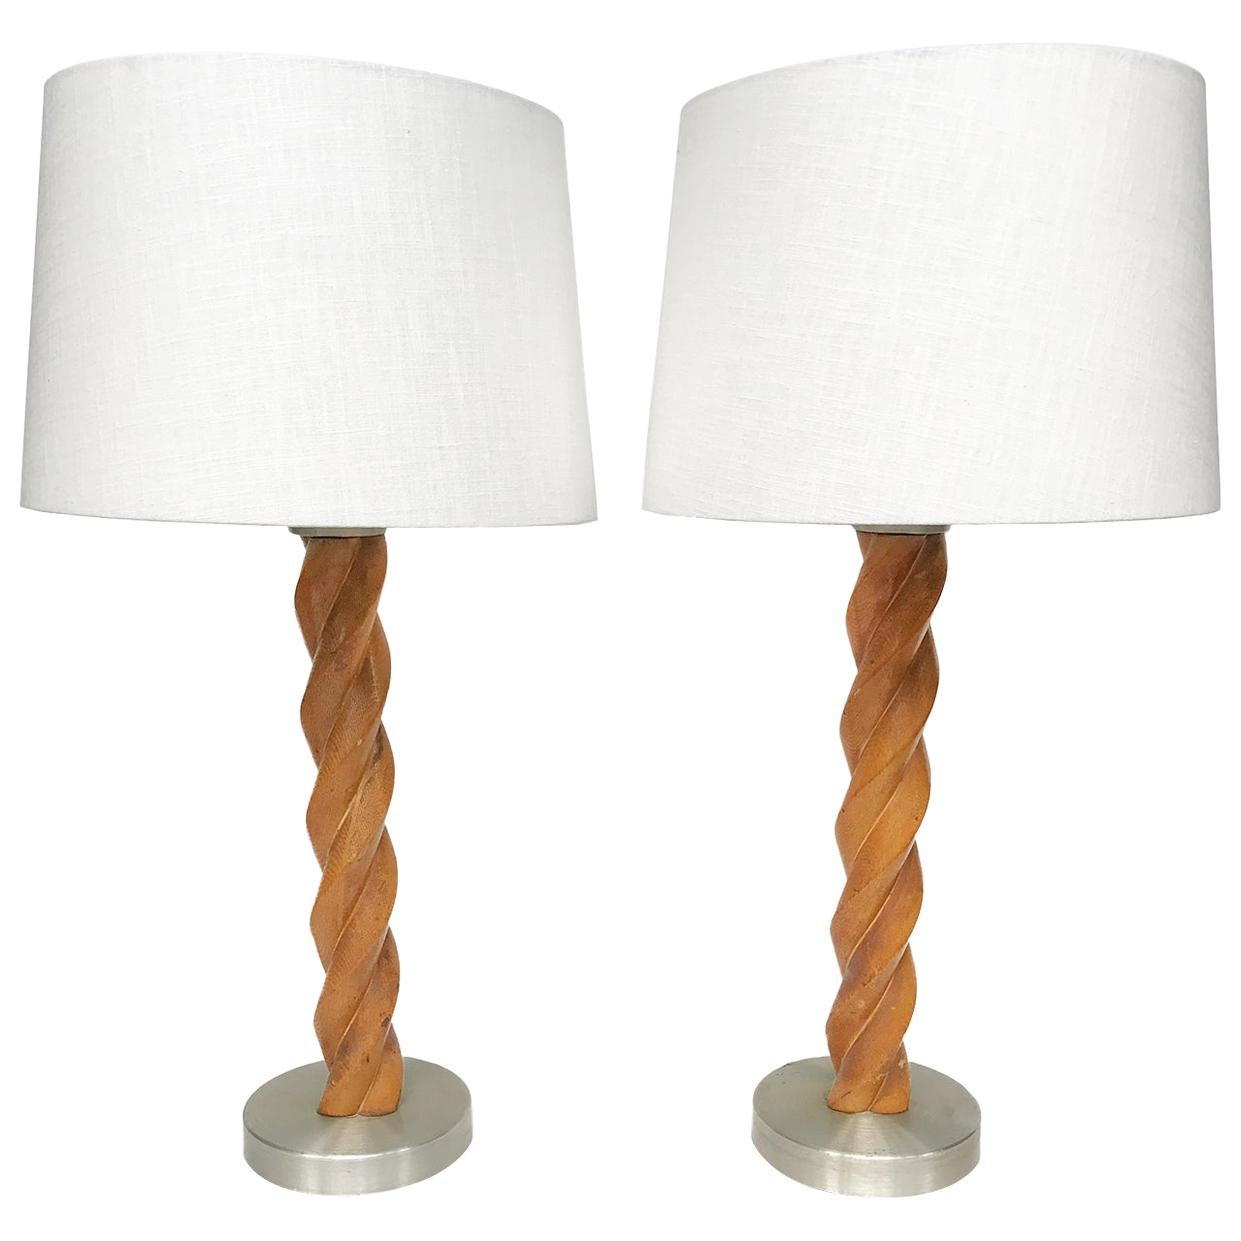 Pair of Midcentury Russel Wright Spiral Oak Table Lamps